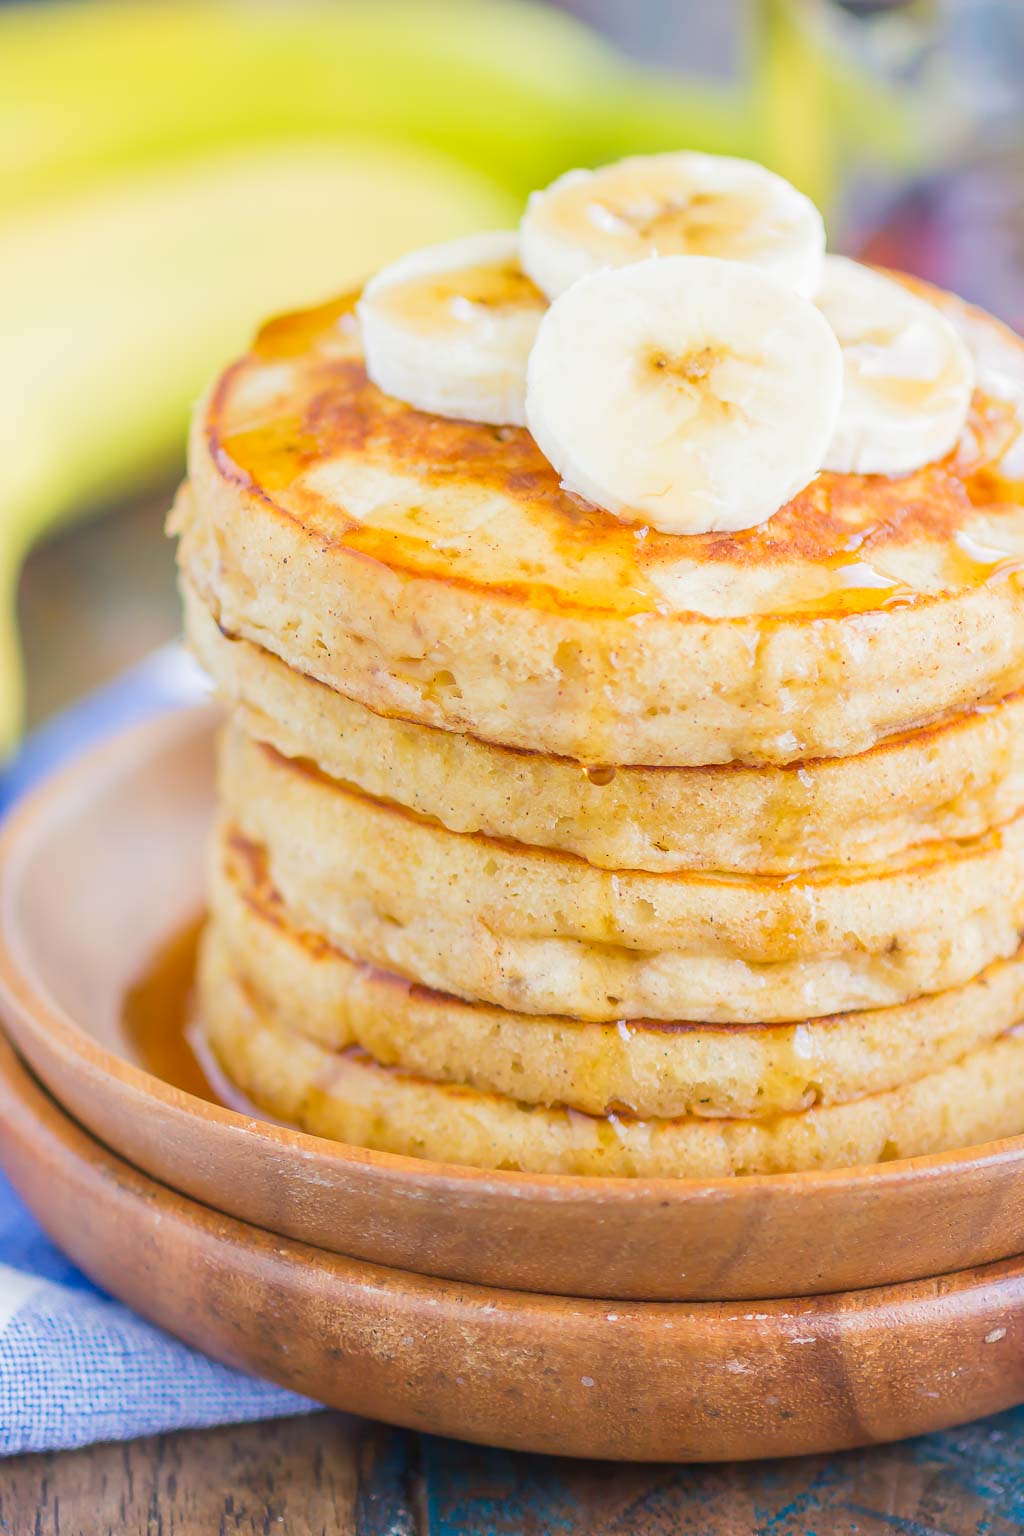 A stack of Banana Pancakes topped with banana slices and maple syrup on a wooden plate.